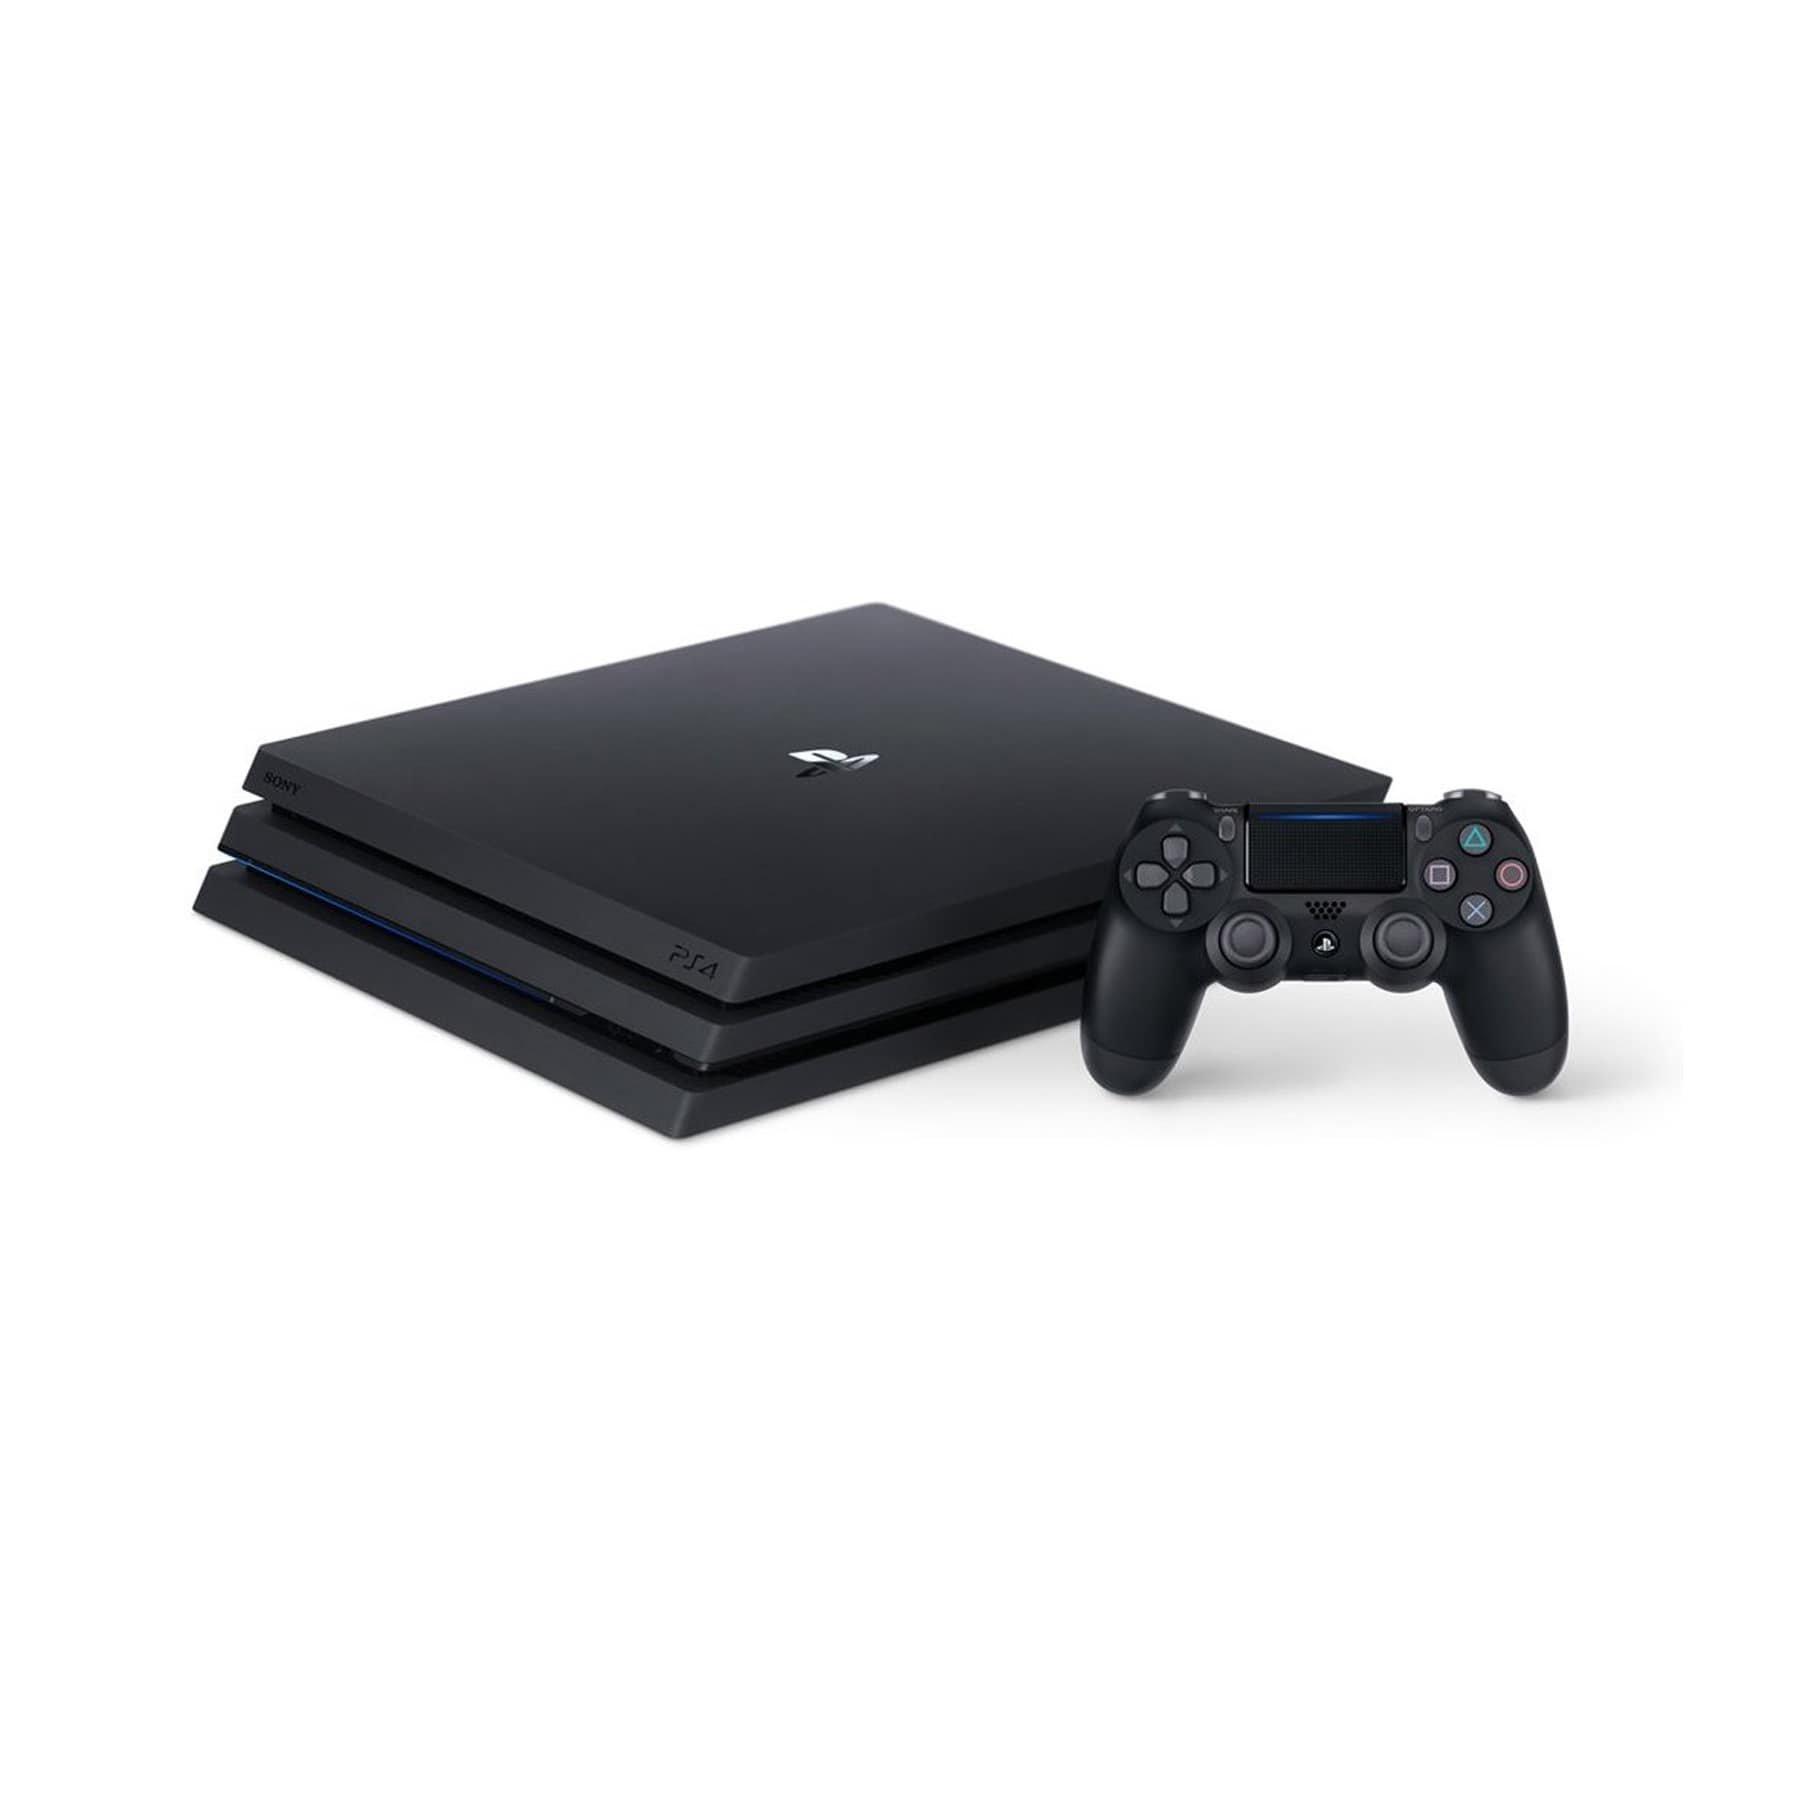 playstation 4 pro when did it come out